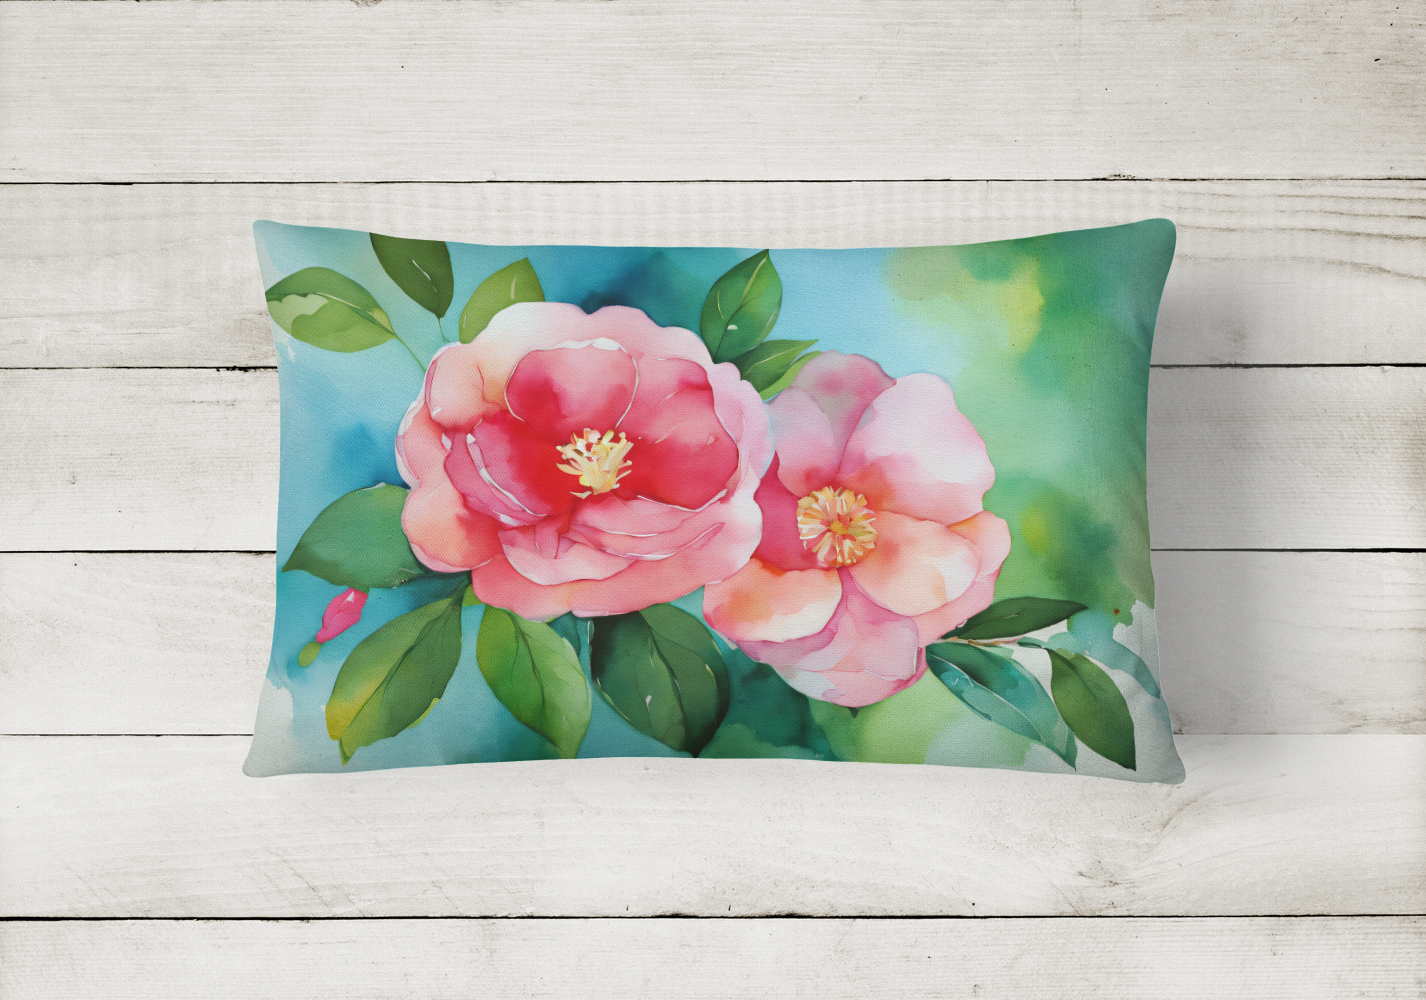 Alabama Camellia in Watercolor Fabric Decorative Pillow 12 in x 16 in - image 2 of 4